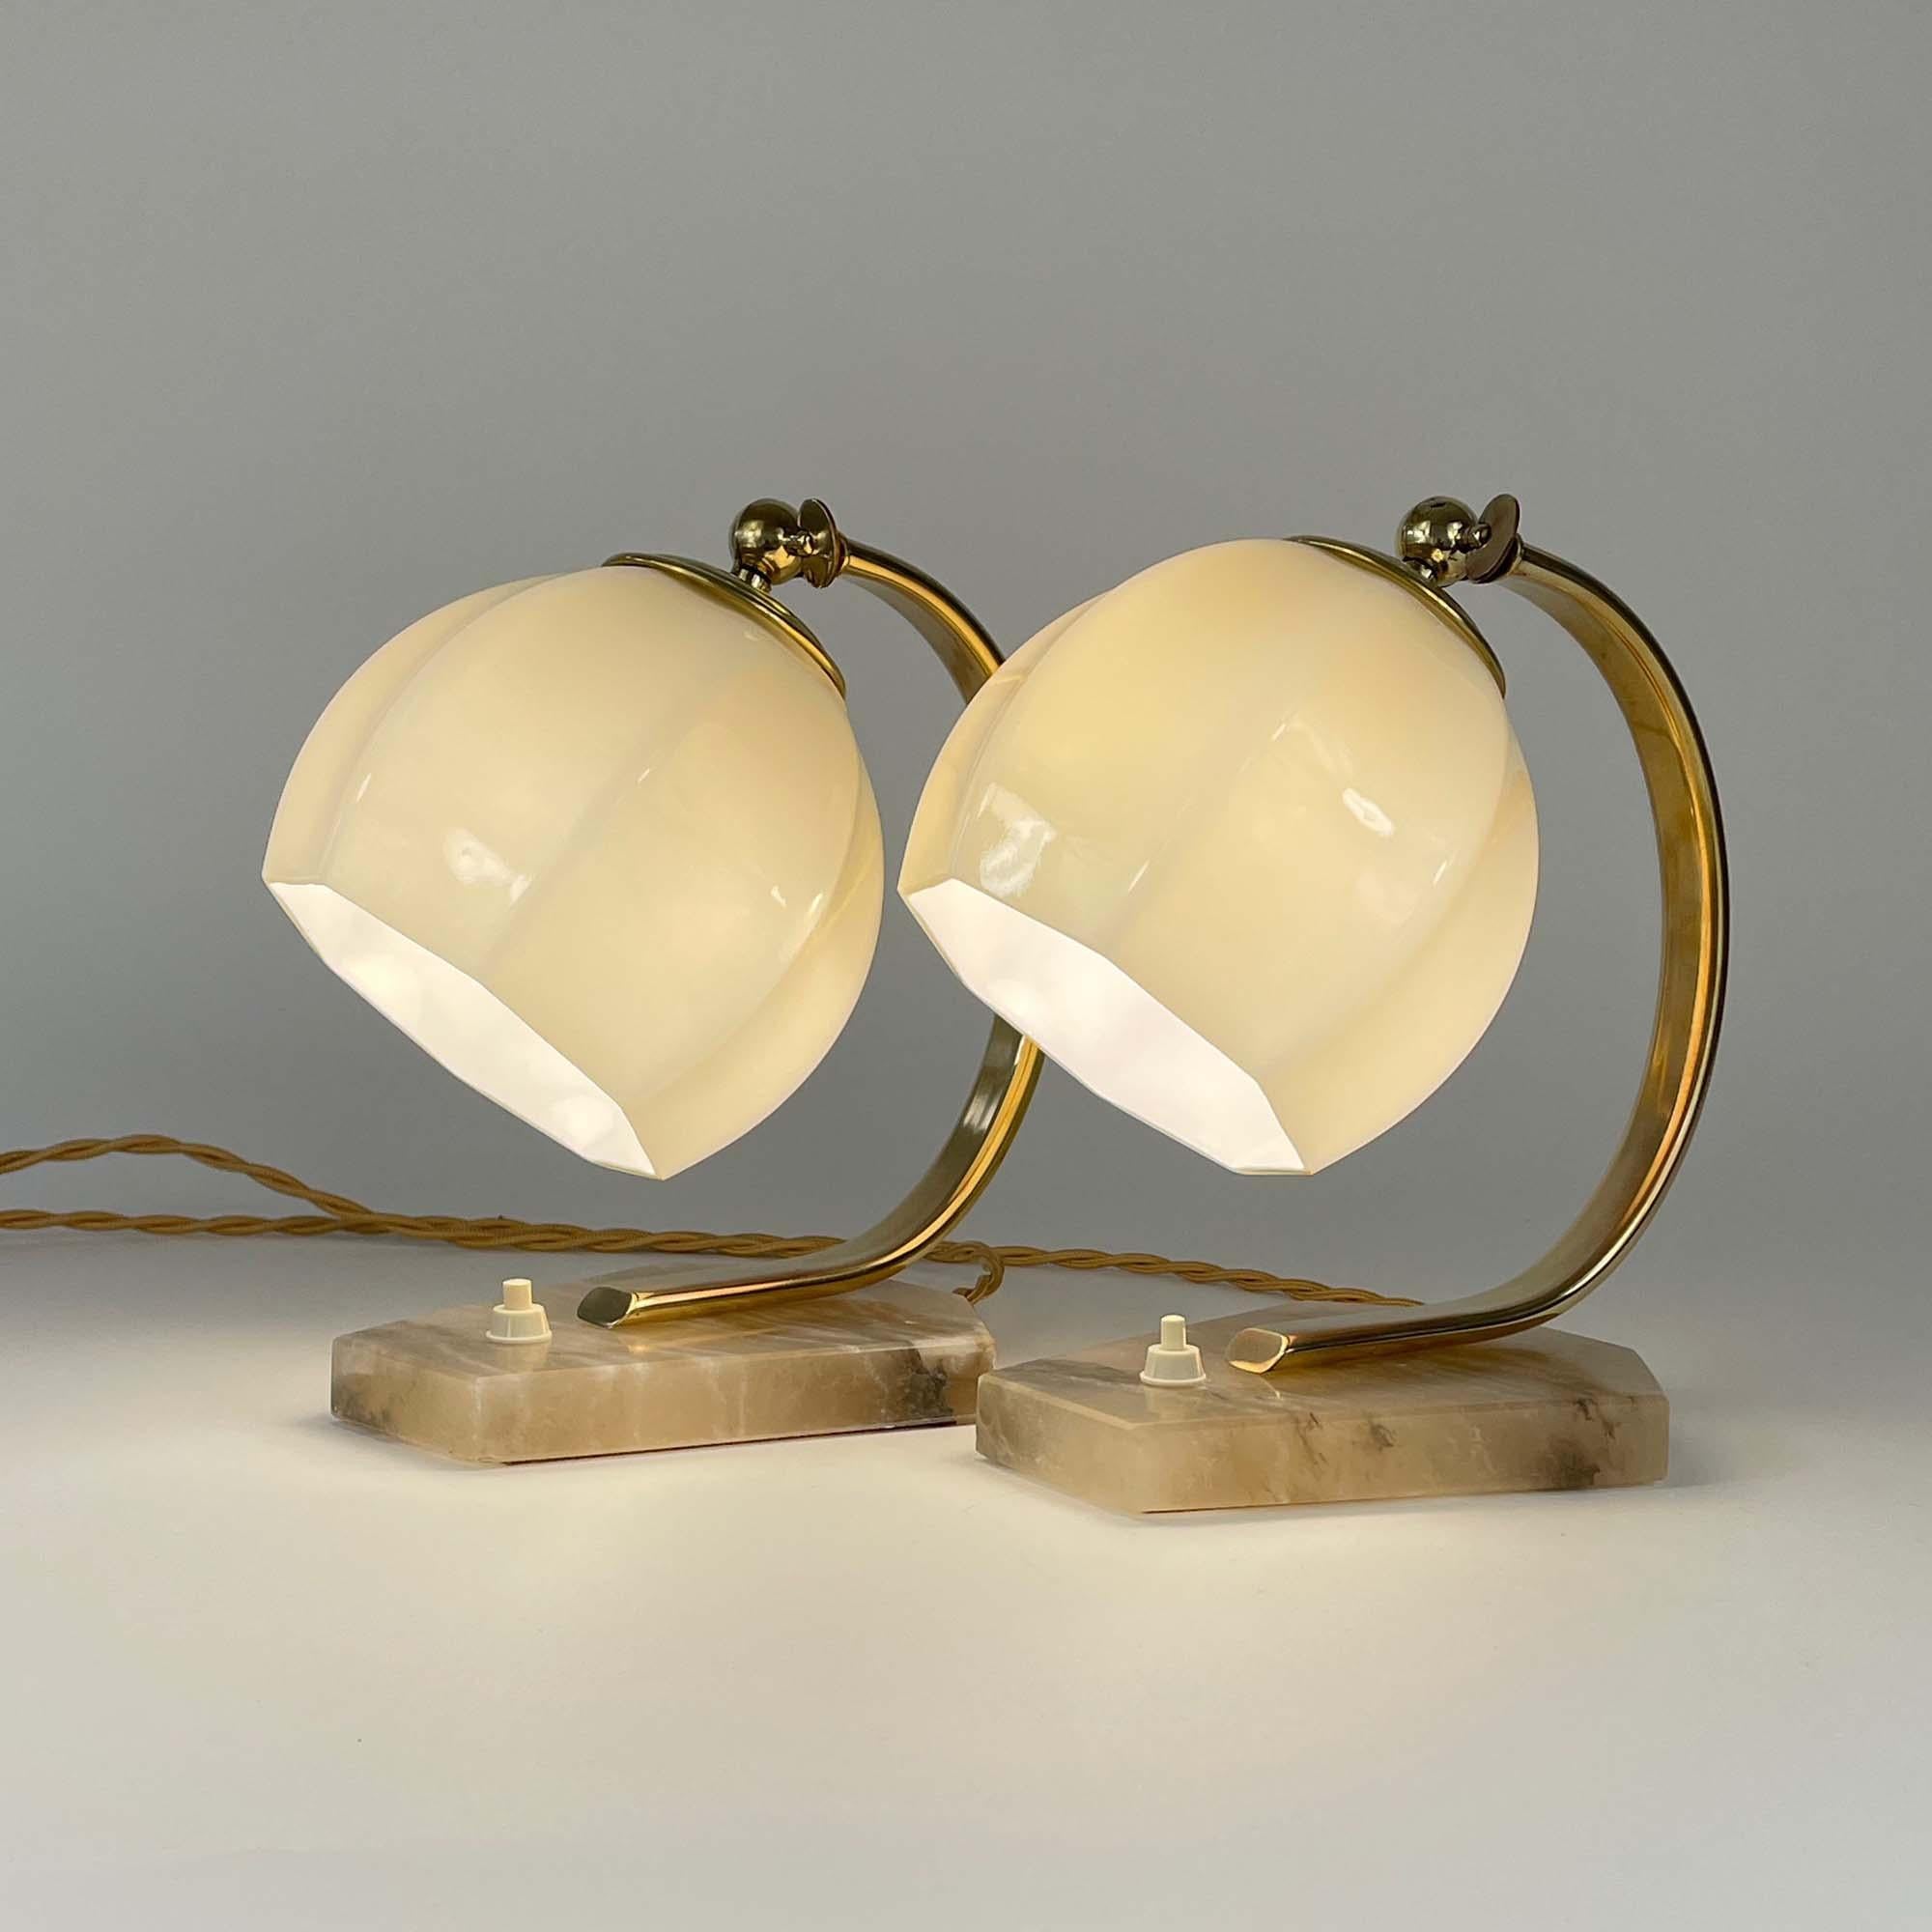 Mid-20th Century German Art Deco Opaline Glass, Alabaster and Brass Table Lamps, 1930s